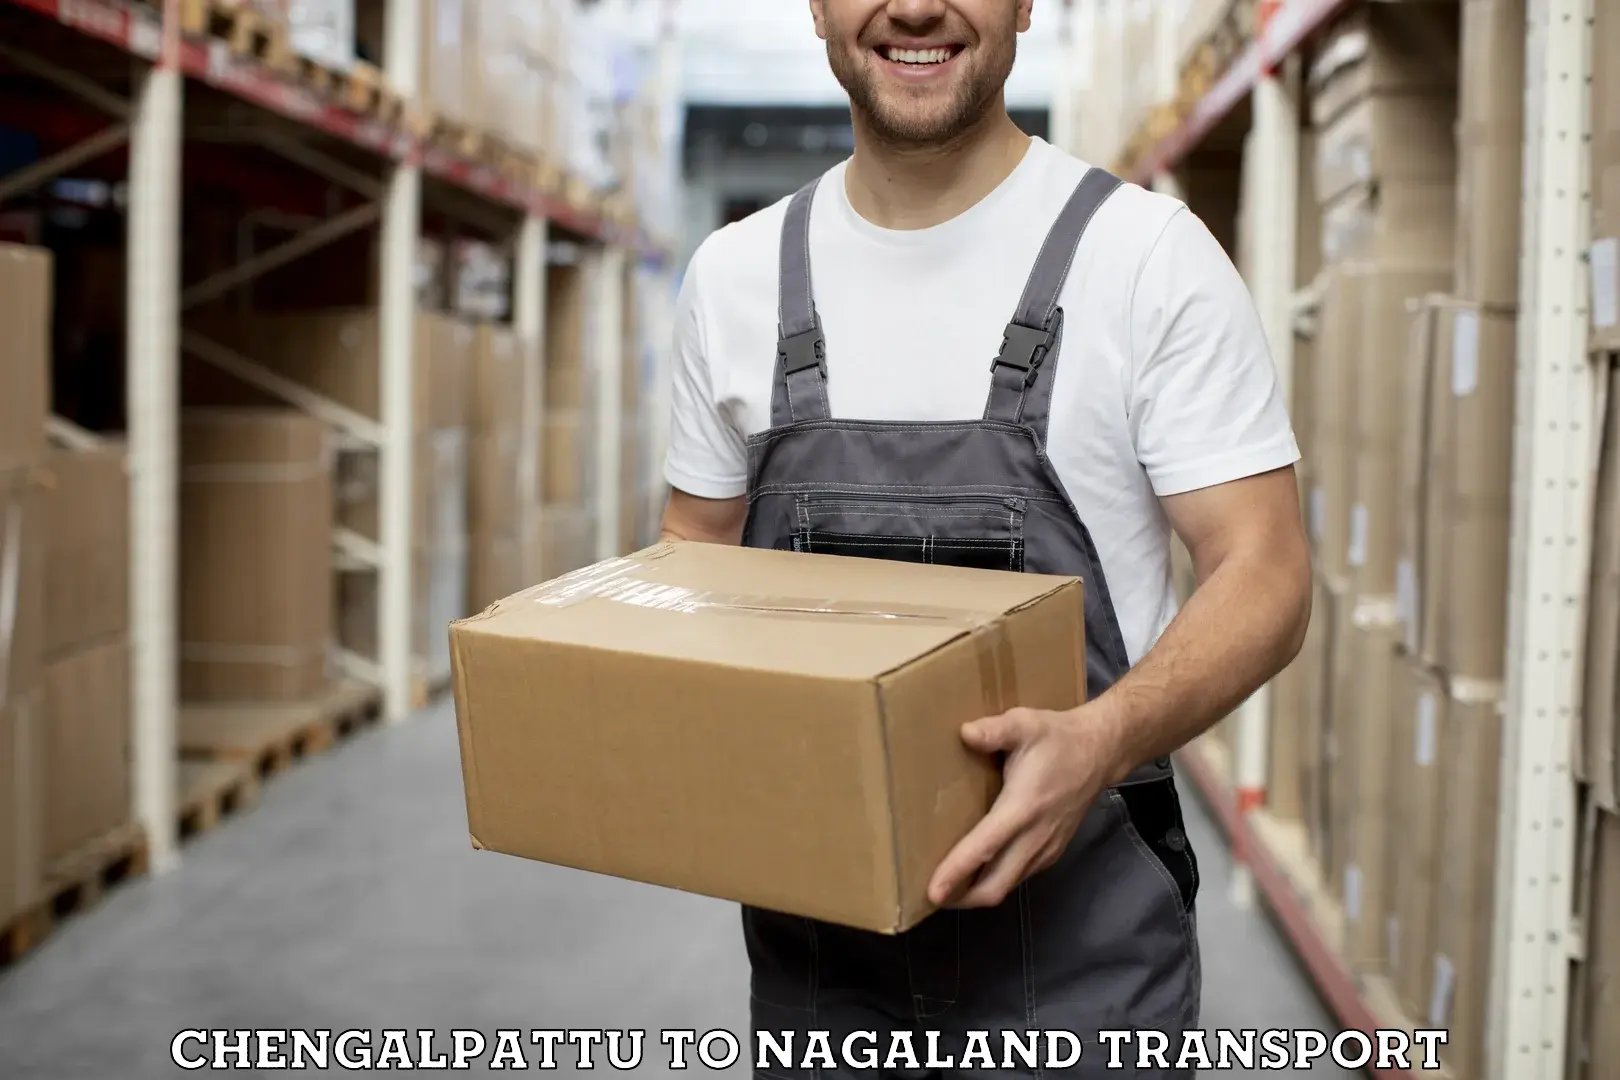 Parcel transport services in Chengalpattu to Nagaland